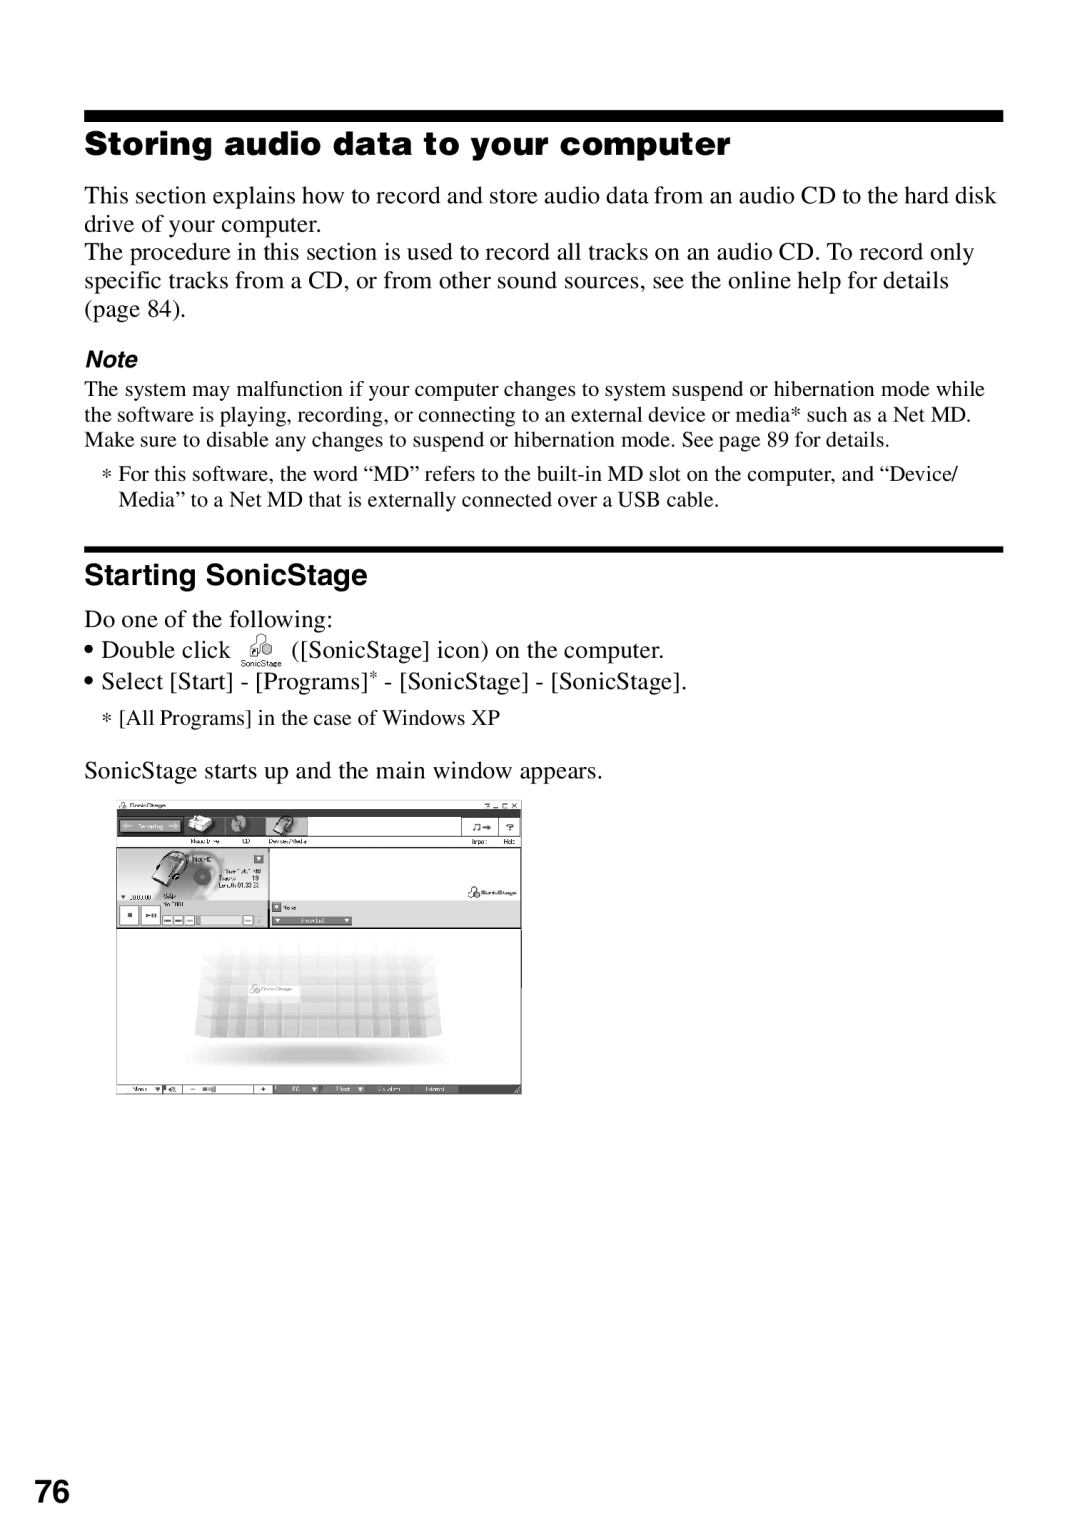 Sony MZ-N510 operating instructions Storing audio data to your computer, Starting SonicStage 